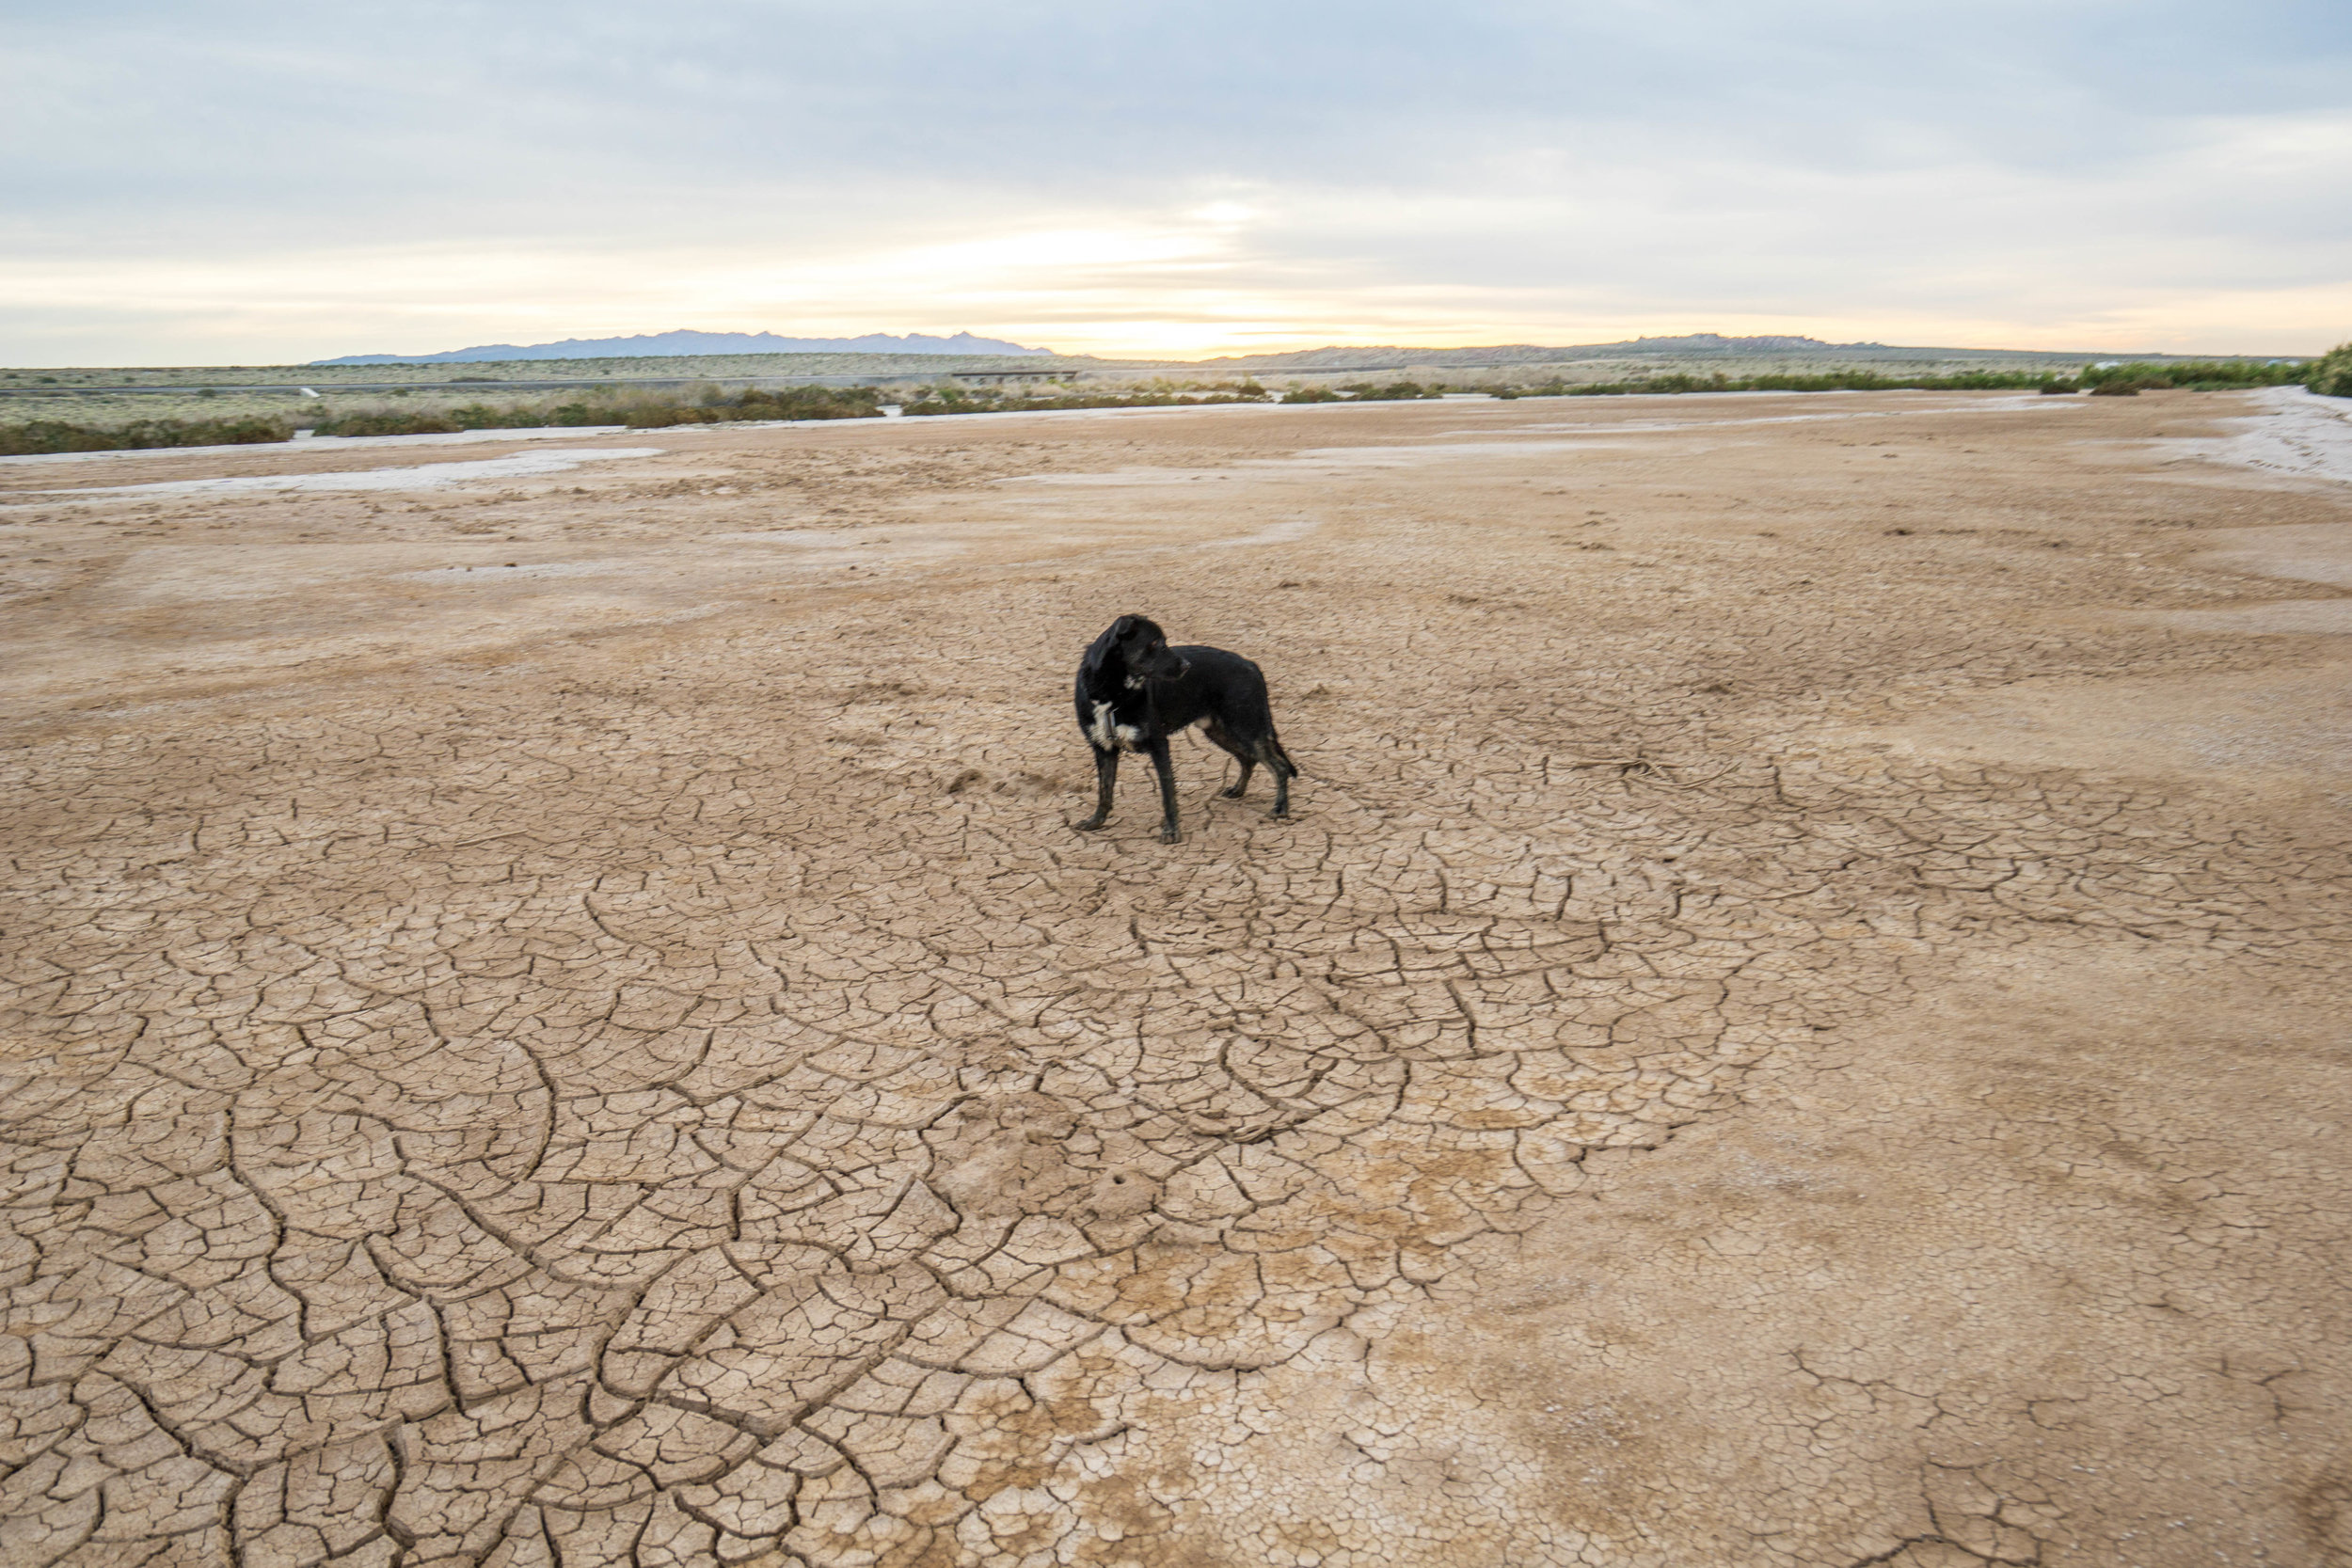 The desert's aridity is evident even next to California's largest lake. In fact, without a spill from a Colorado River water pipe &amp; agricultural run-off, there wouldn't even be a lake here.